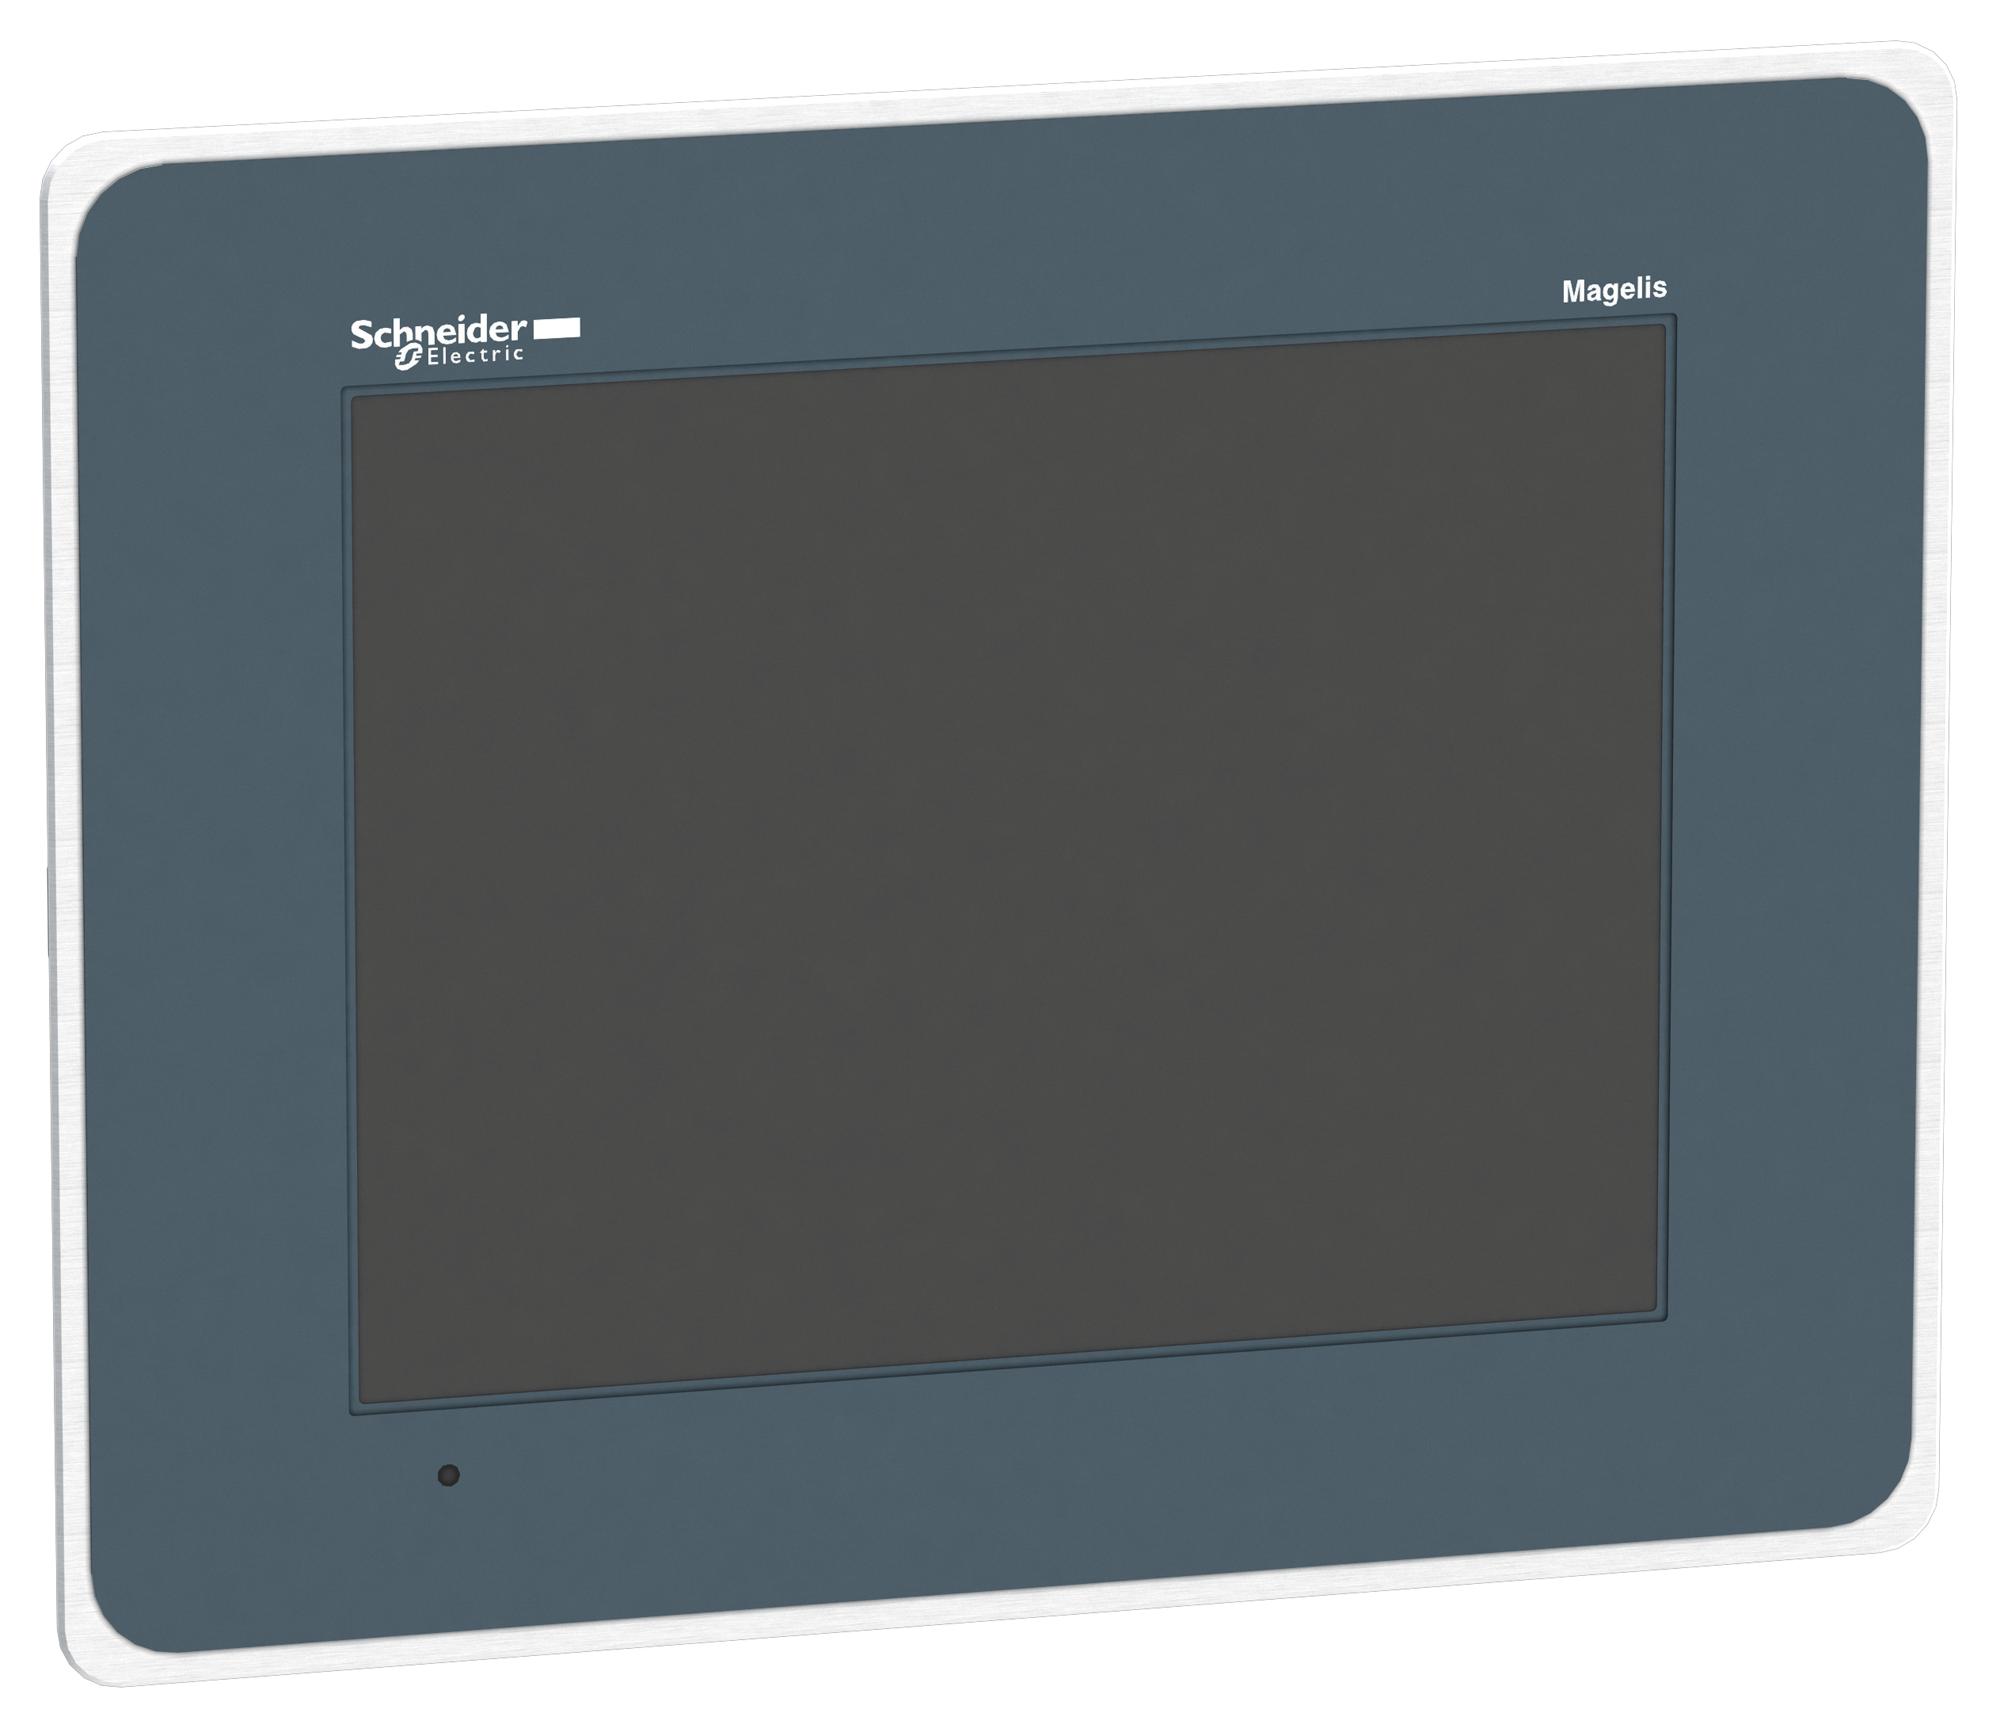 HMIGTO6315 TOUCHSCREEN PANEL, 96MB, 12.1", 800X600 SCHNEIDER ELECTRIC